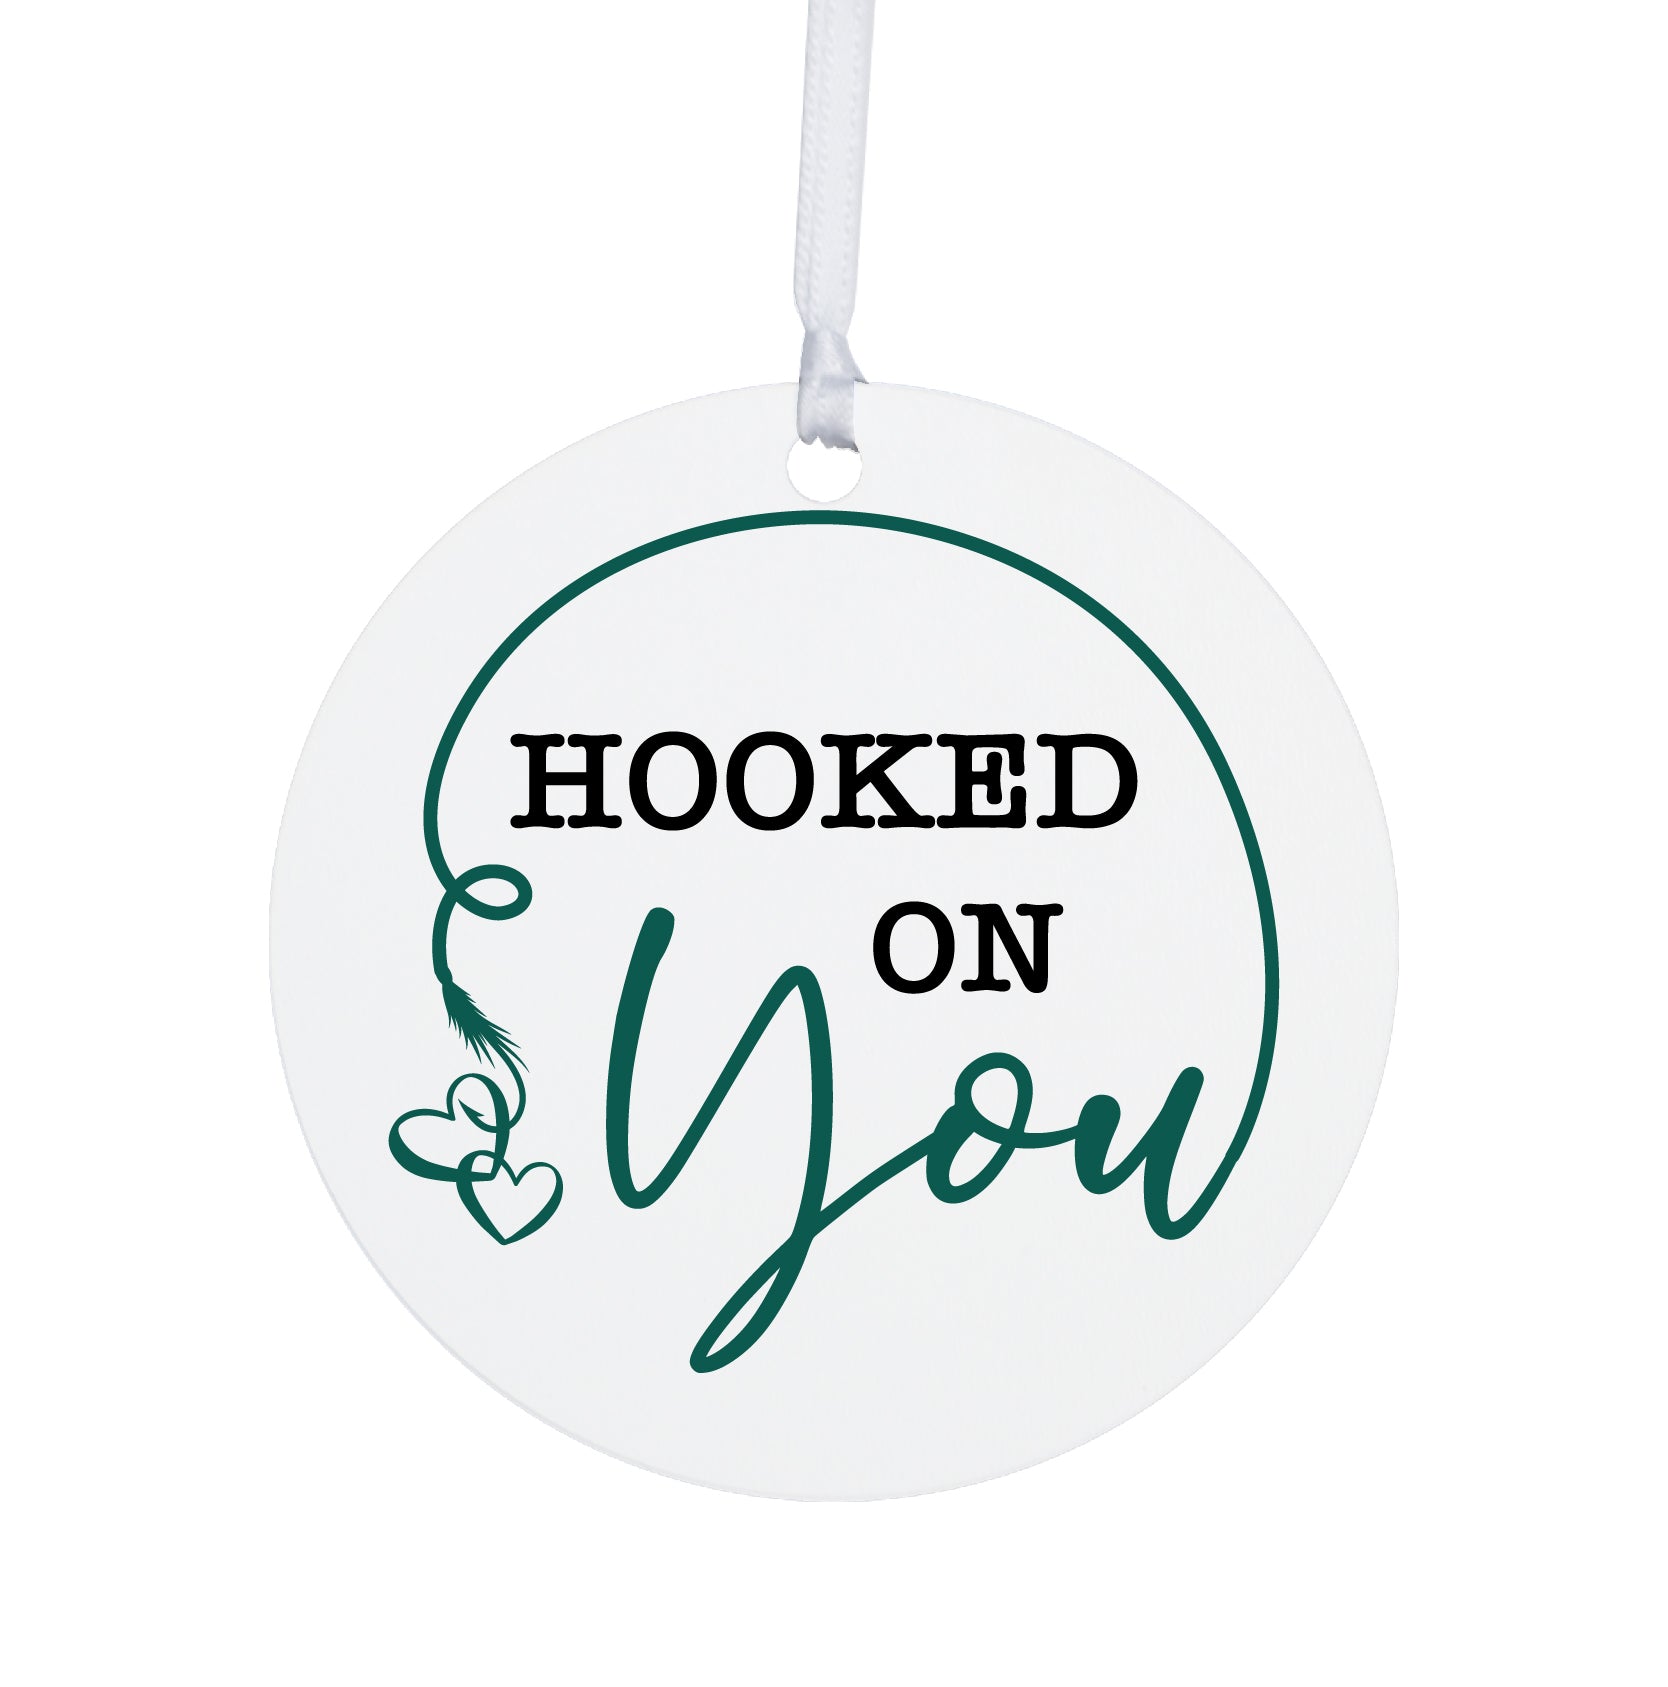 Fishing Dad White Ornament With Inspirational Message Gift Ideas - Hooked On You - LifeSong Milestones